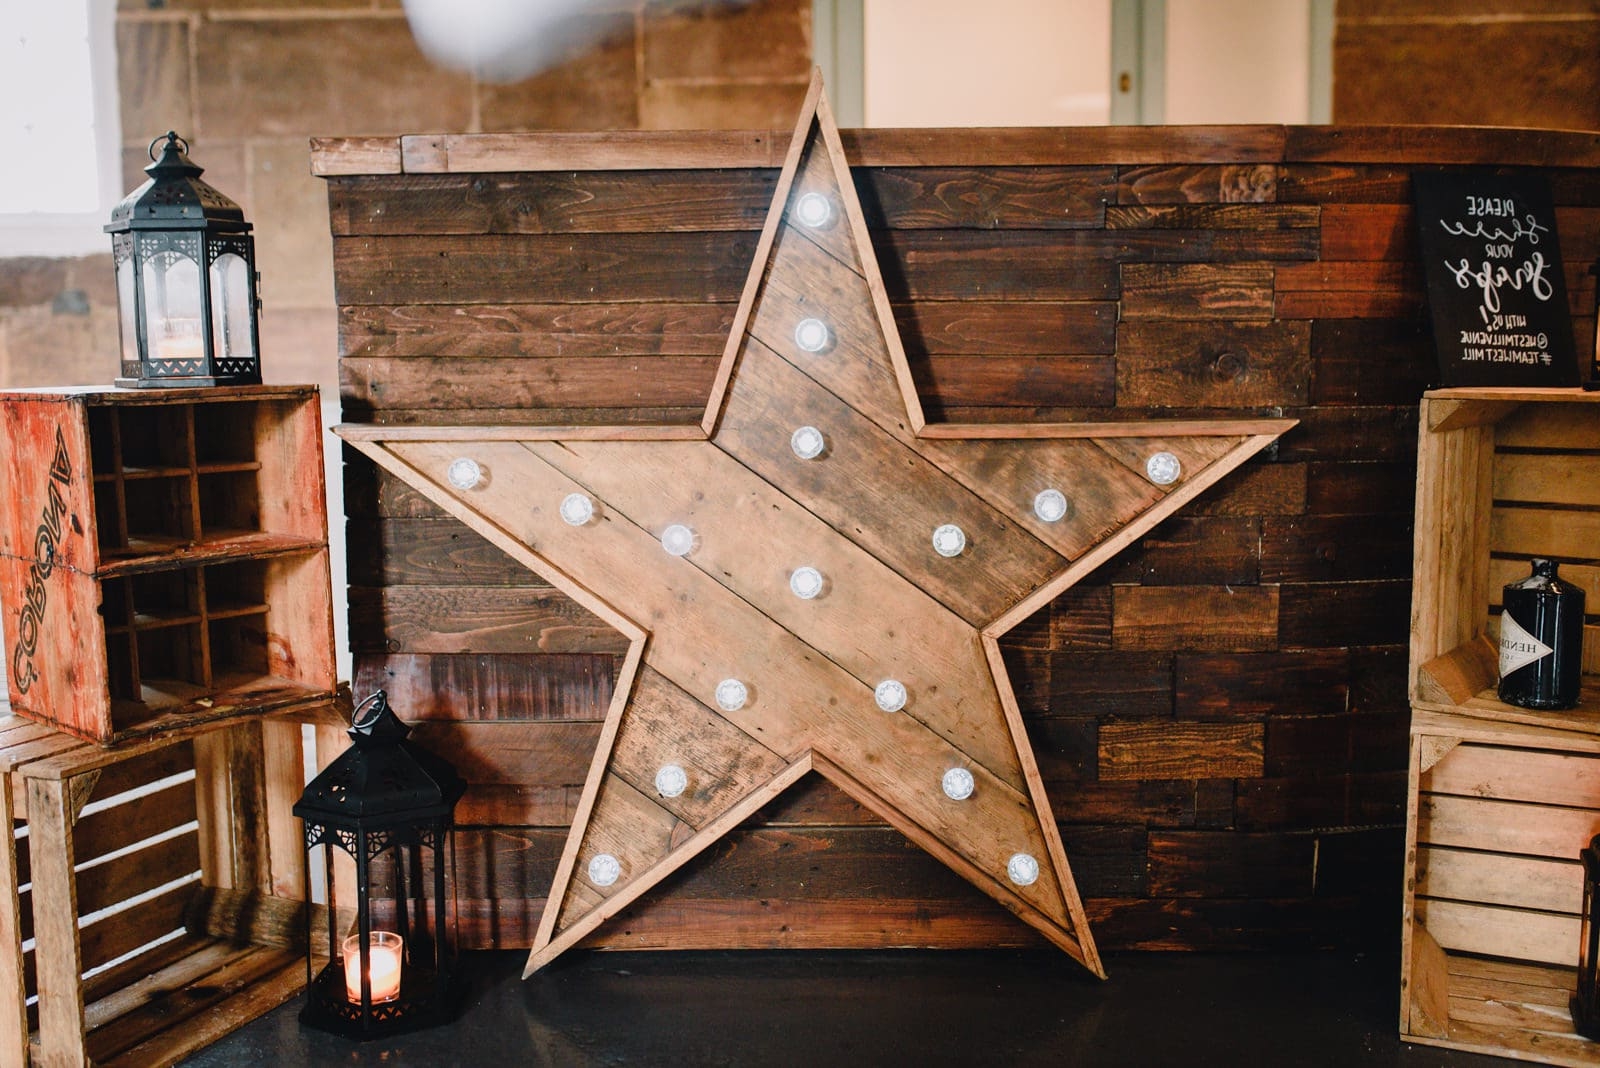 Vintage star decor at west mill